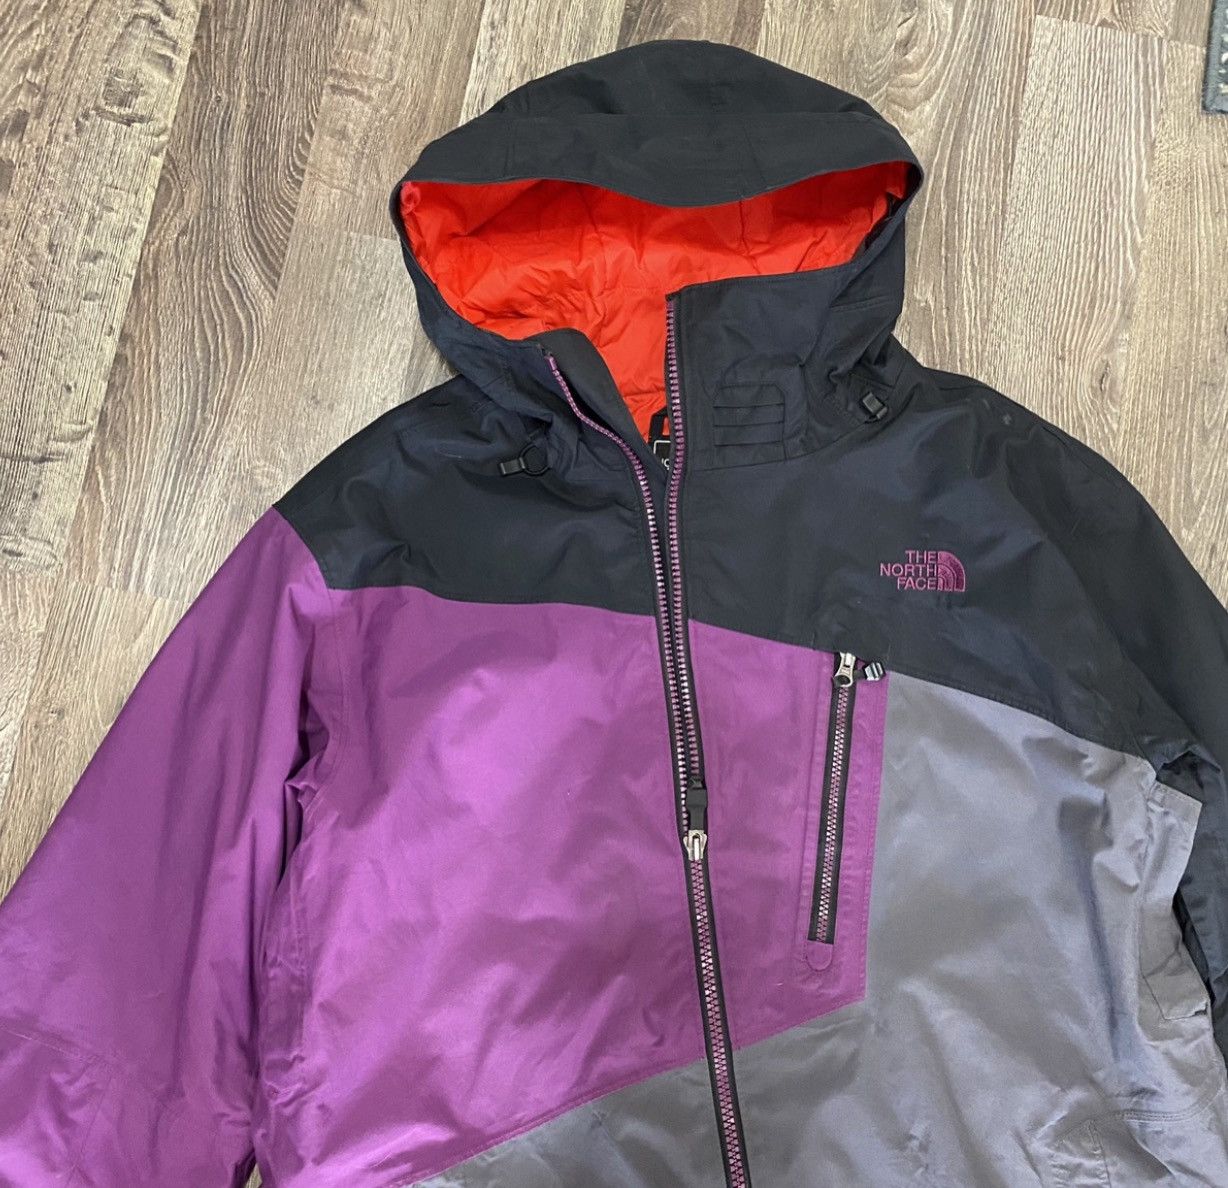 The North Face Northface cryptic gonzo ski jacket | Grailed